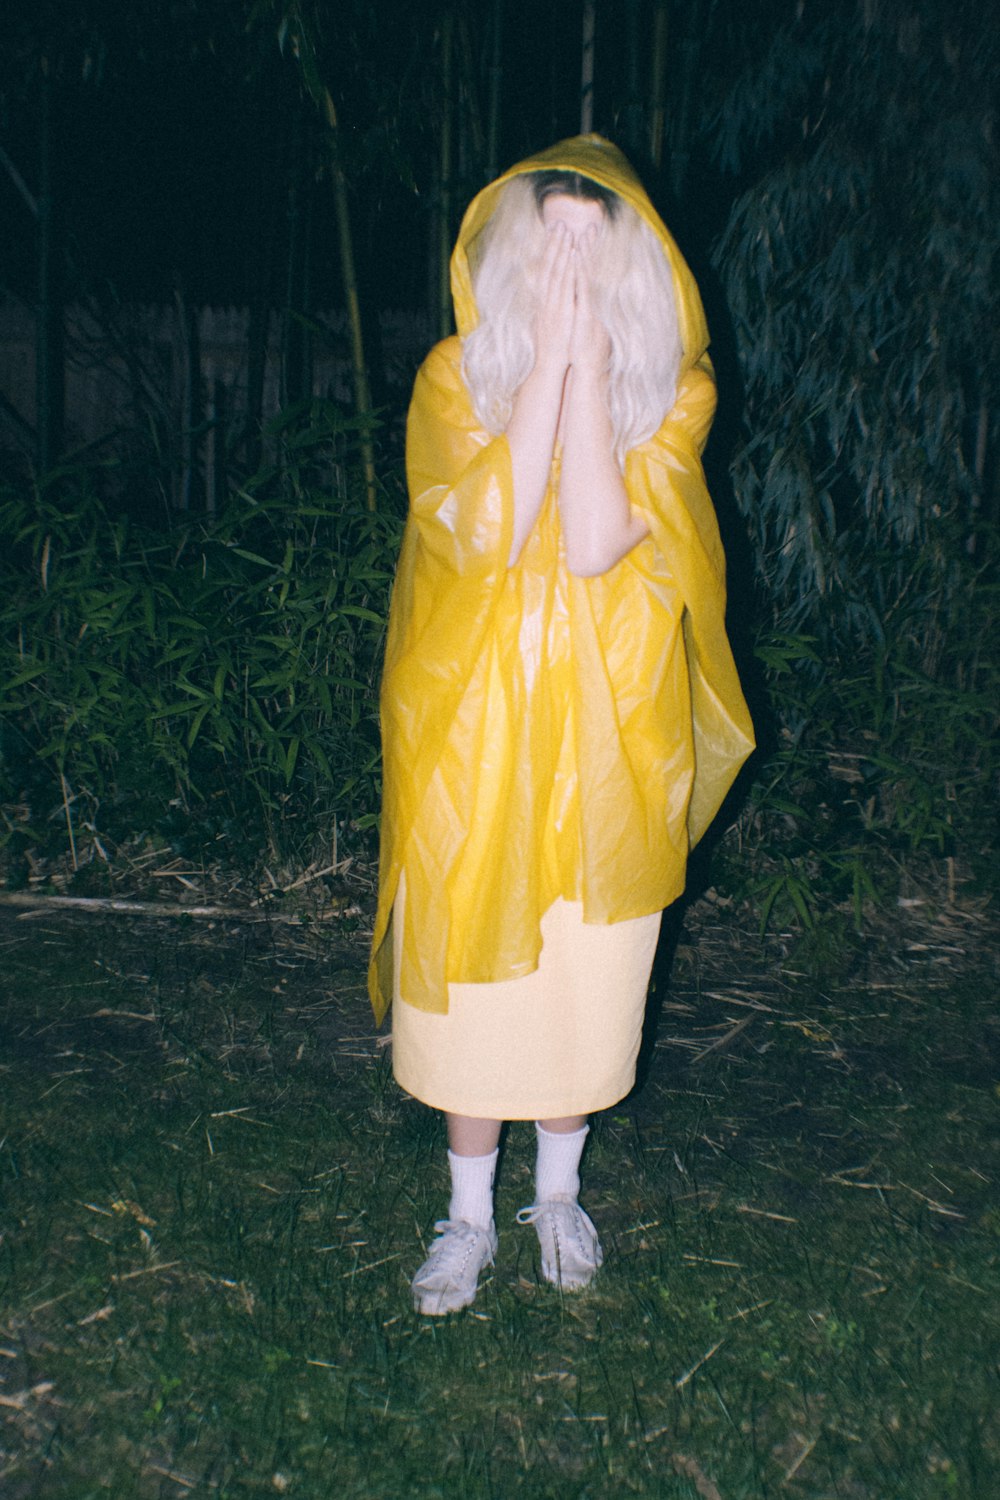 person wearing yellow raincoat covering face outdoors during nighttime